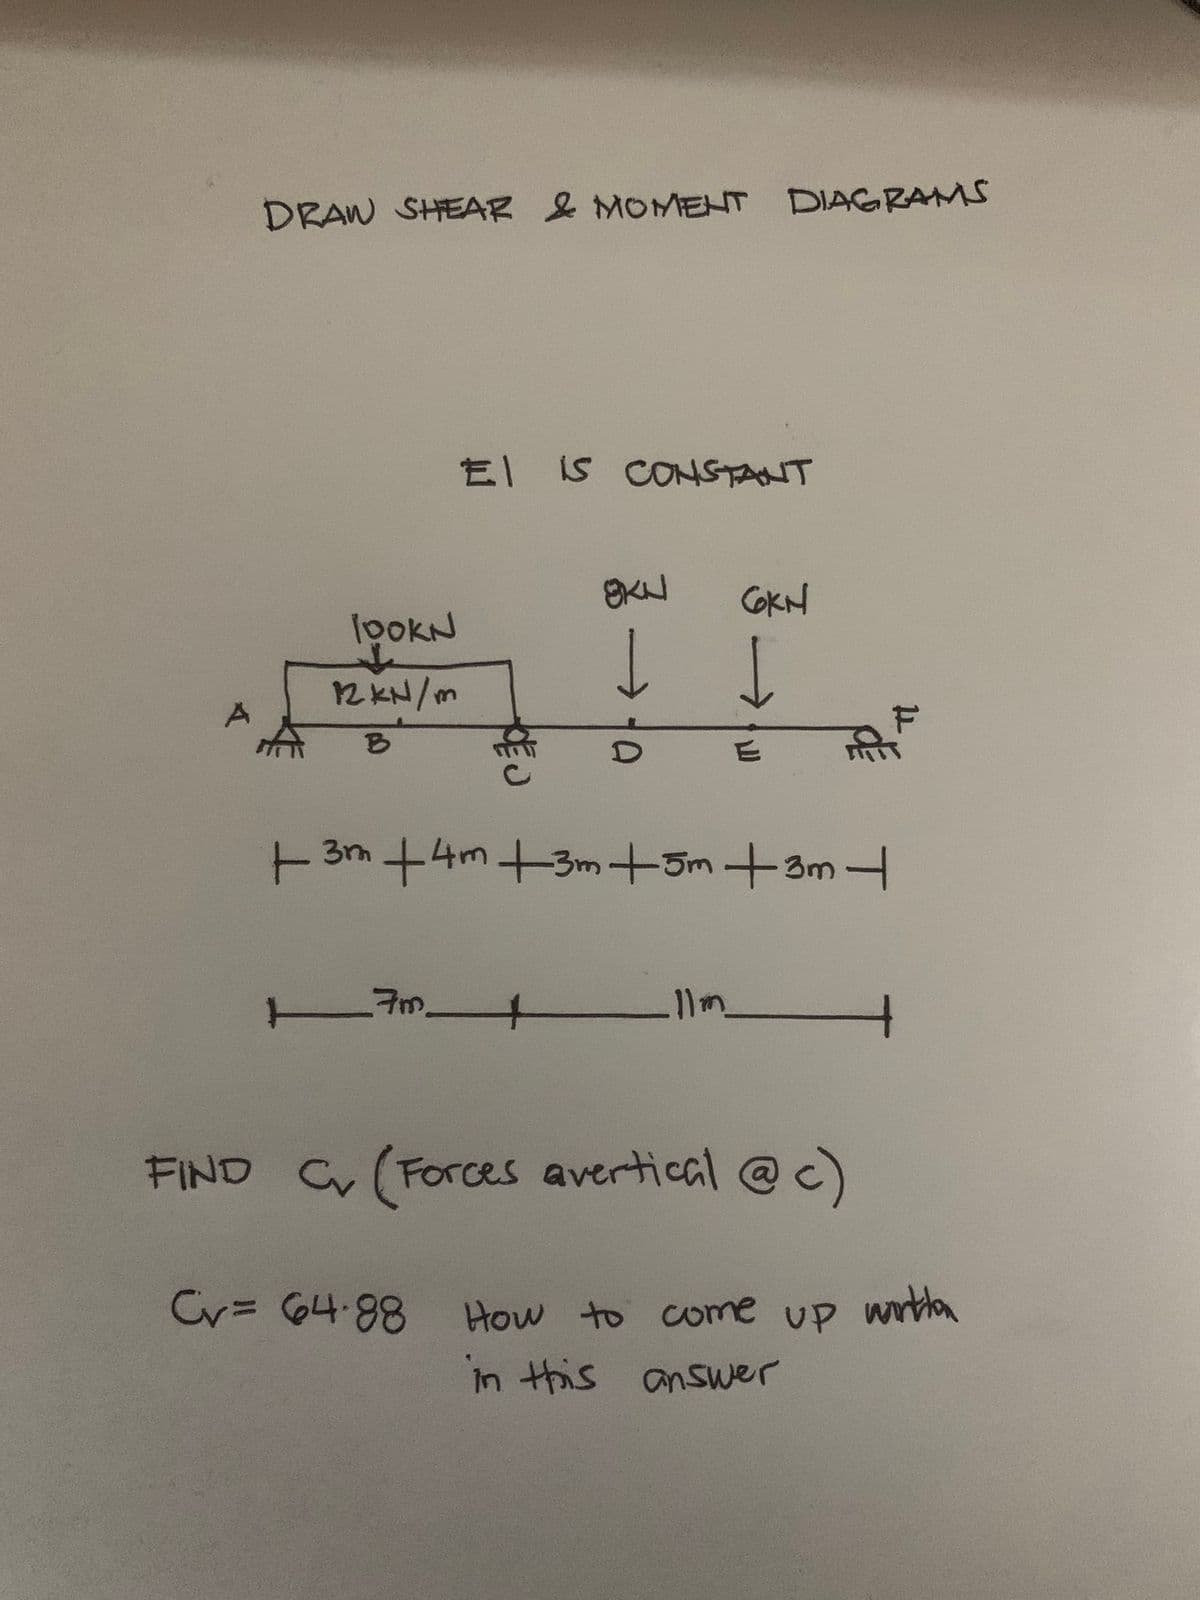 DRAW SHEAR & MOMENT DIAGRAMS
LOOKN
12 kN/m
B
El iS CONSTANT
17m_ +
OKN
Cv = 64.88
D
+3m +4m +3m +5m +3m
COKN
Į
FIND C (Forces avertical @c)
How to come up wortion
in this answer